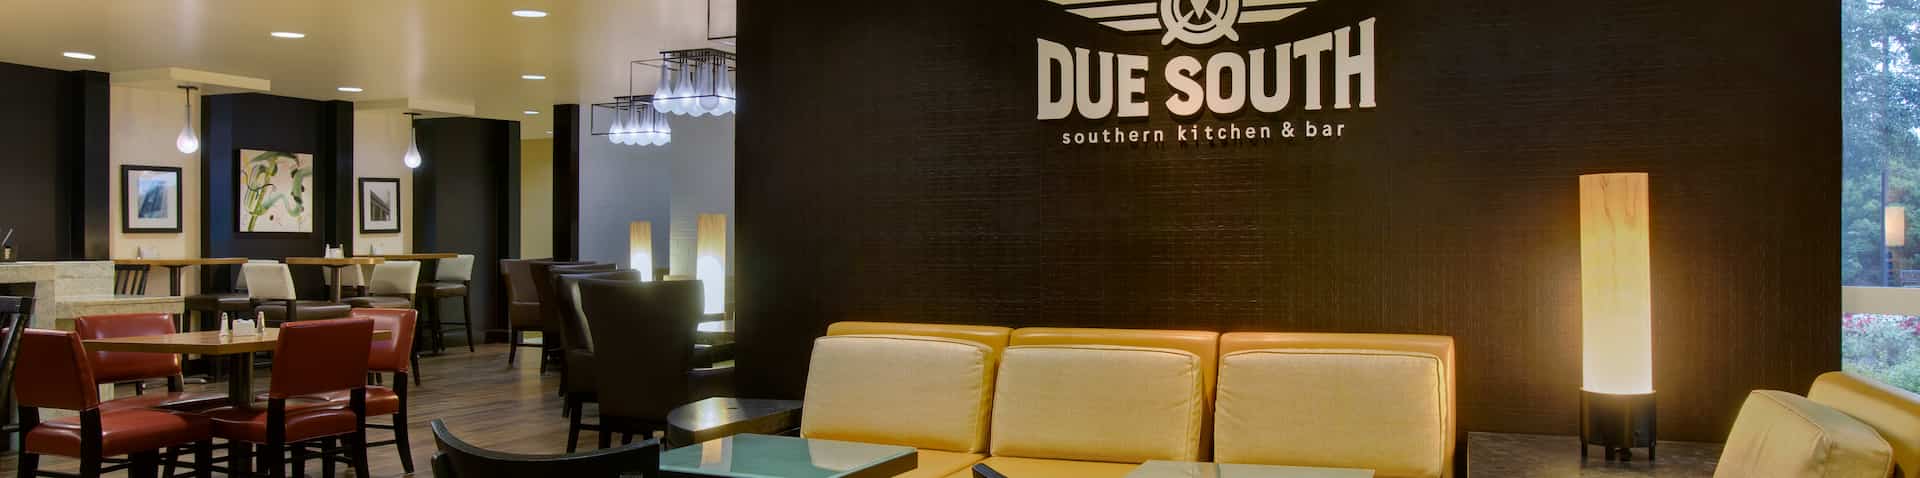 seating area with Due South logo